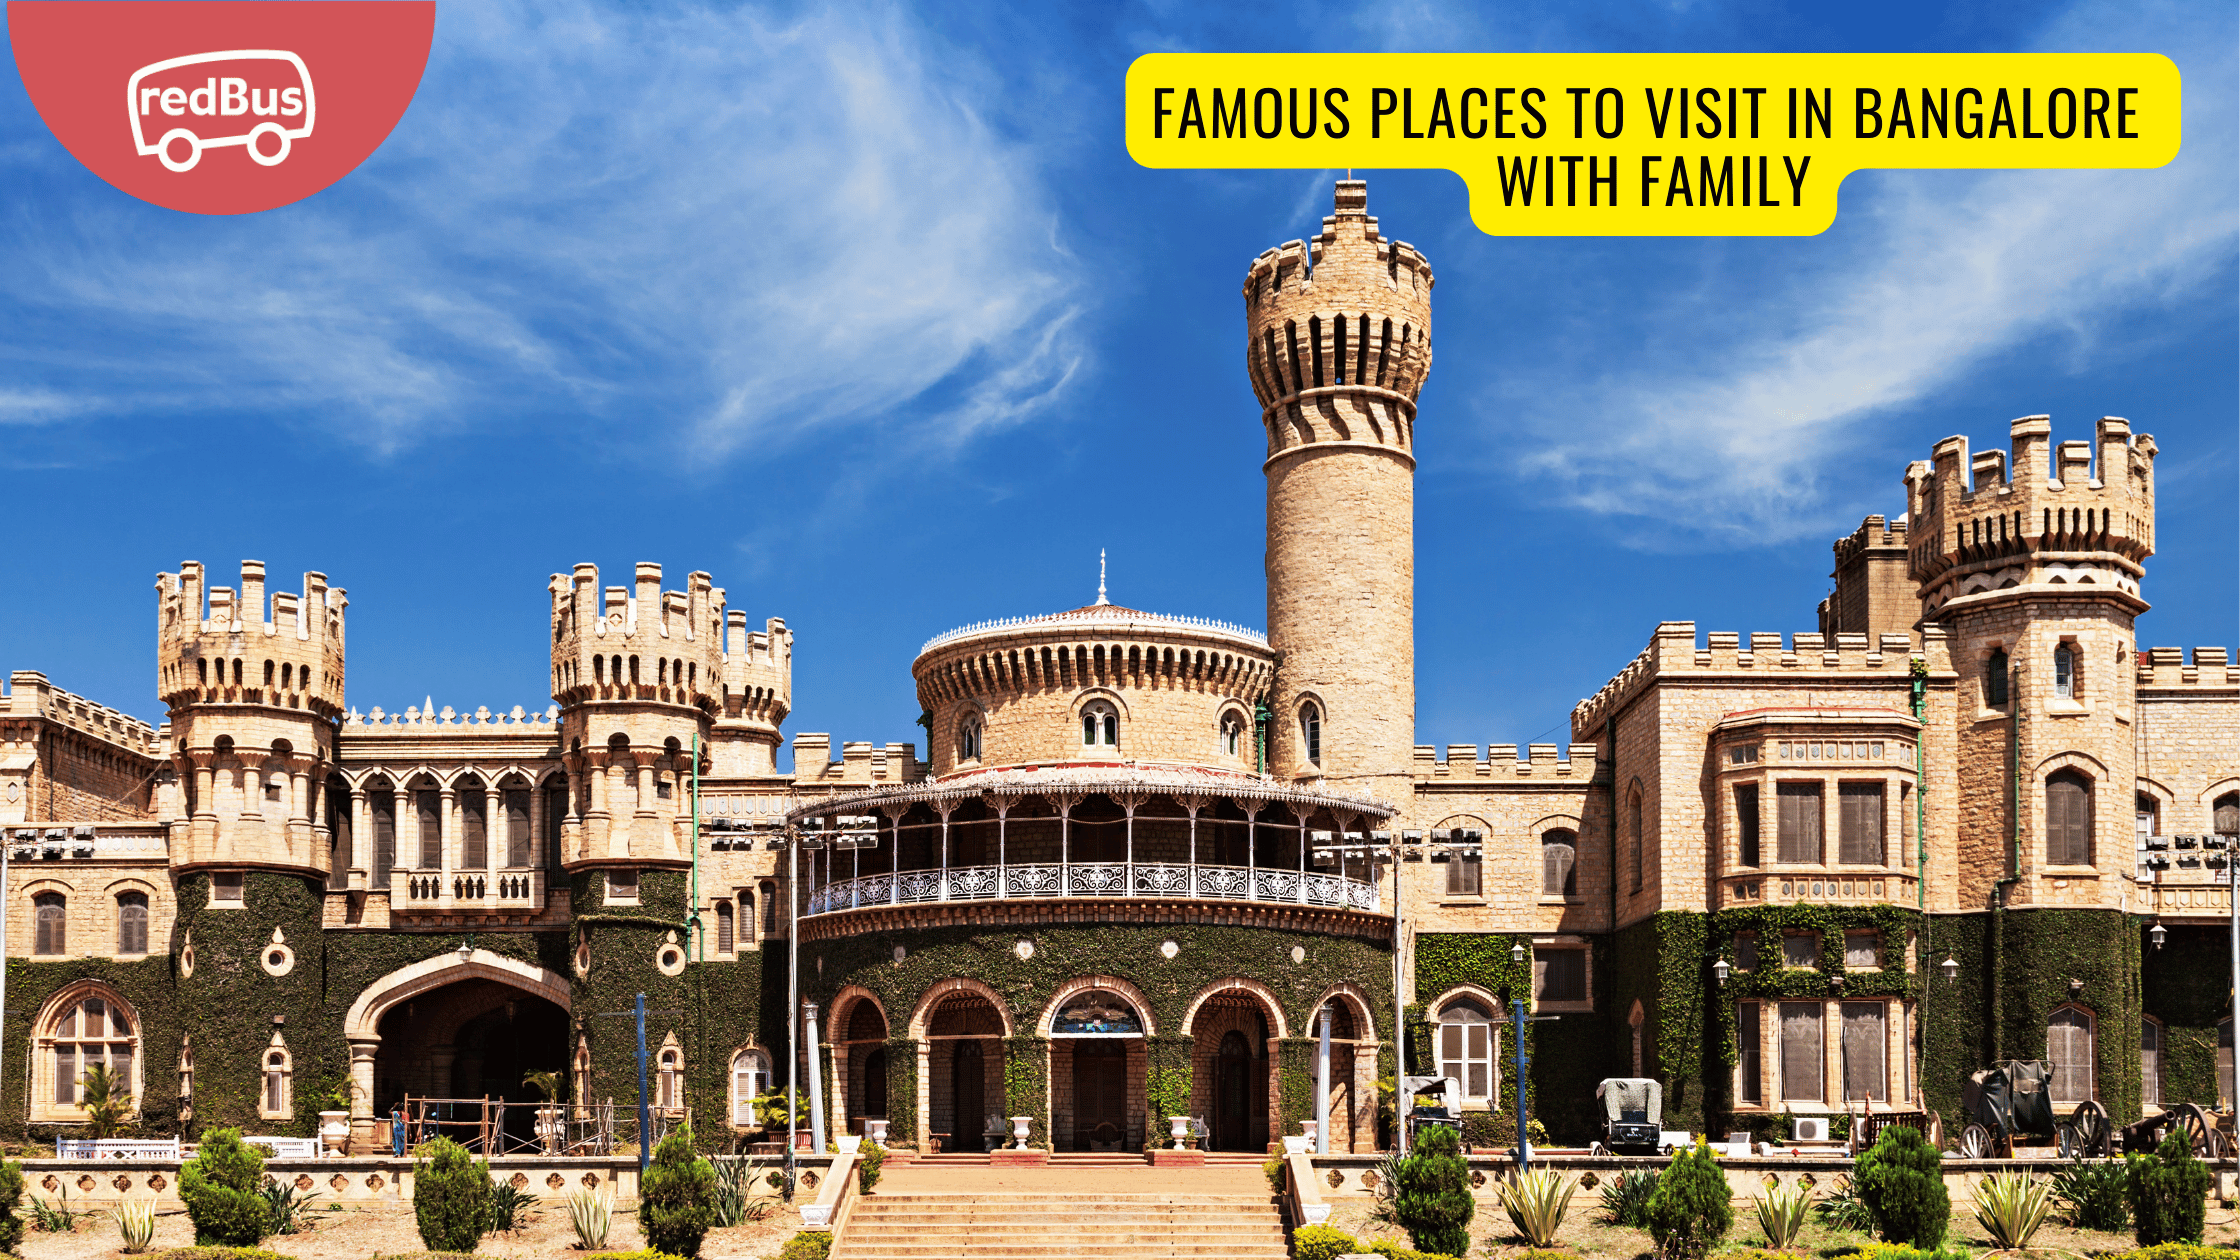 20 Famous Places to Visit in Bangalore with Family - redBus Blog